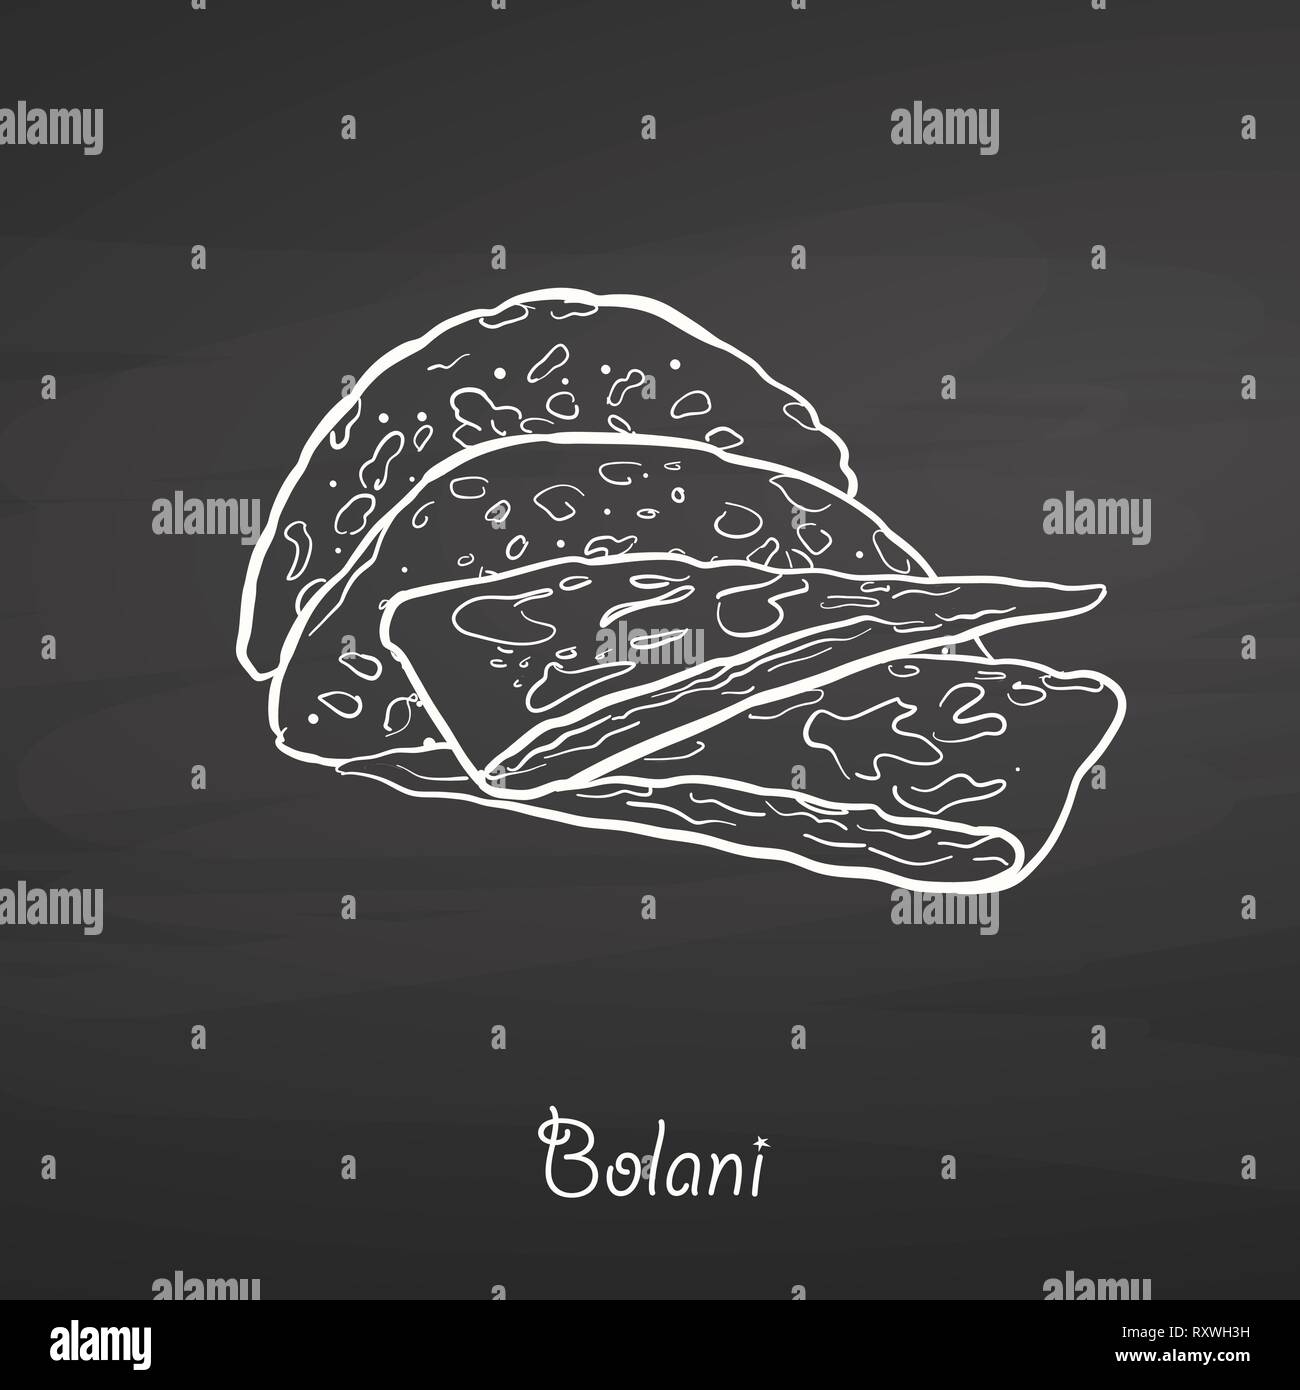 Bolani food sketch on chalkboard. Vector drawing of Flatbread, usually known in Afghanistan. Food illustration series. Stock Vector